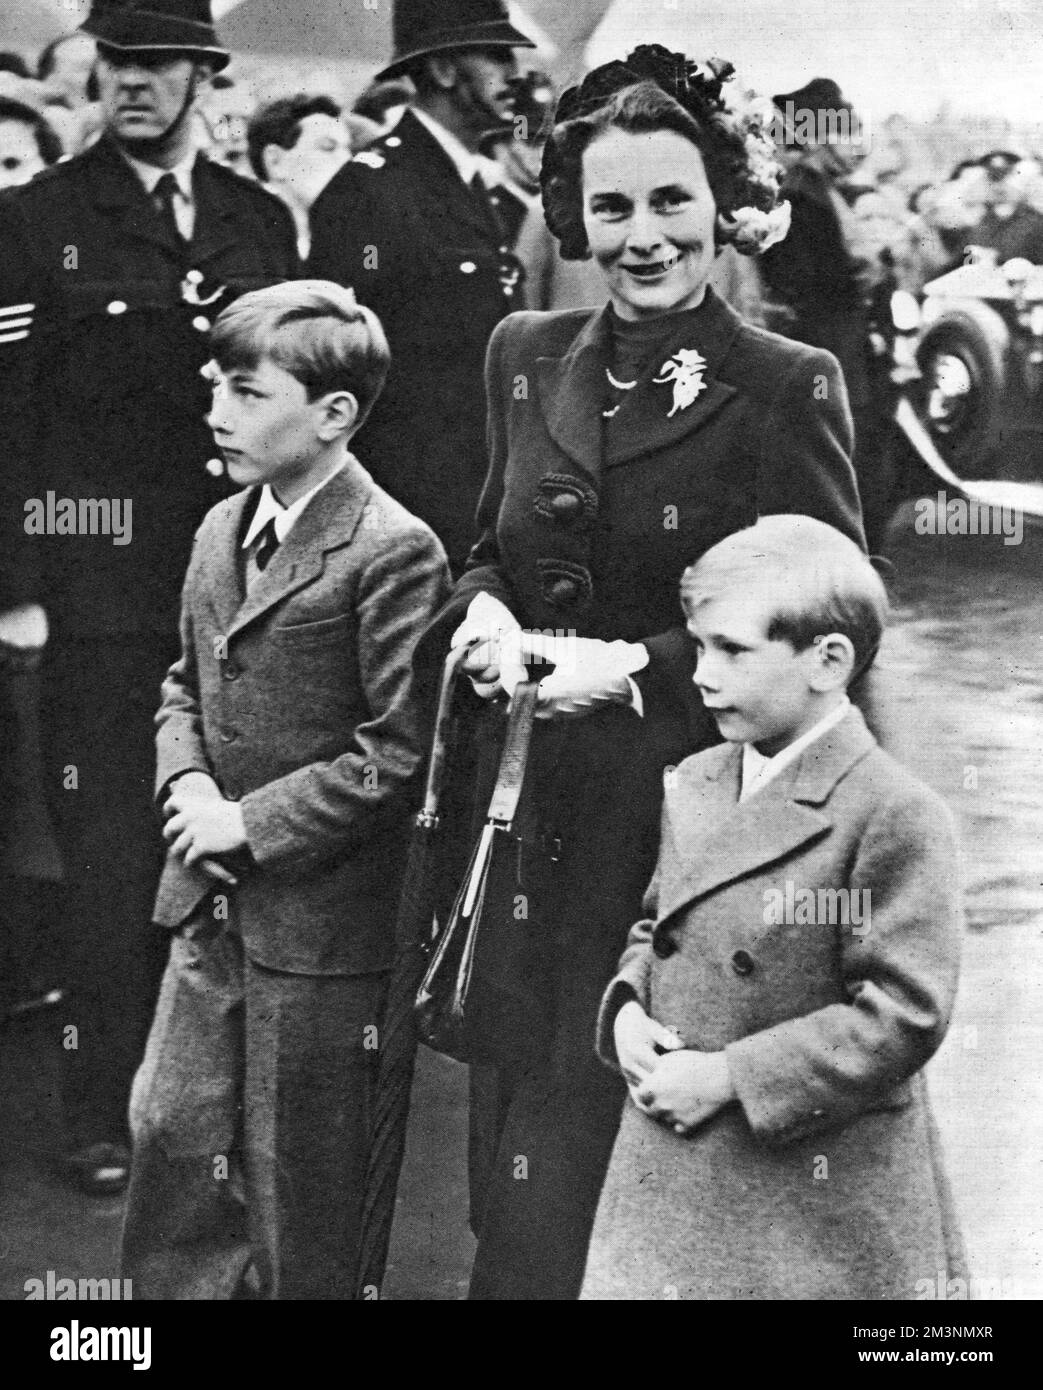 Scene at a royal visit to the Festival of Britain site on the South Bank, London.  Here the Duchess of Gloucester is seen arriving, with her two sons, Prince William (left) and Prince Richard (right).       Date: 4 May 1951 Stock Photo